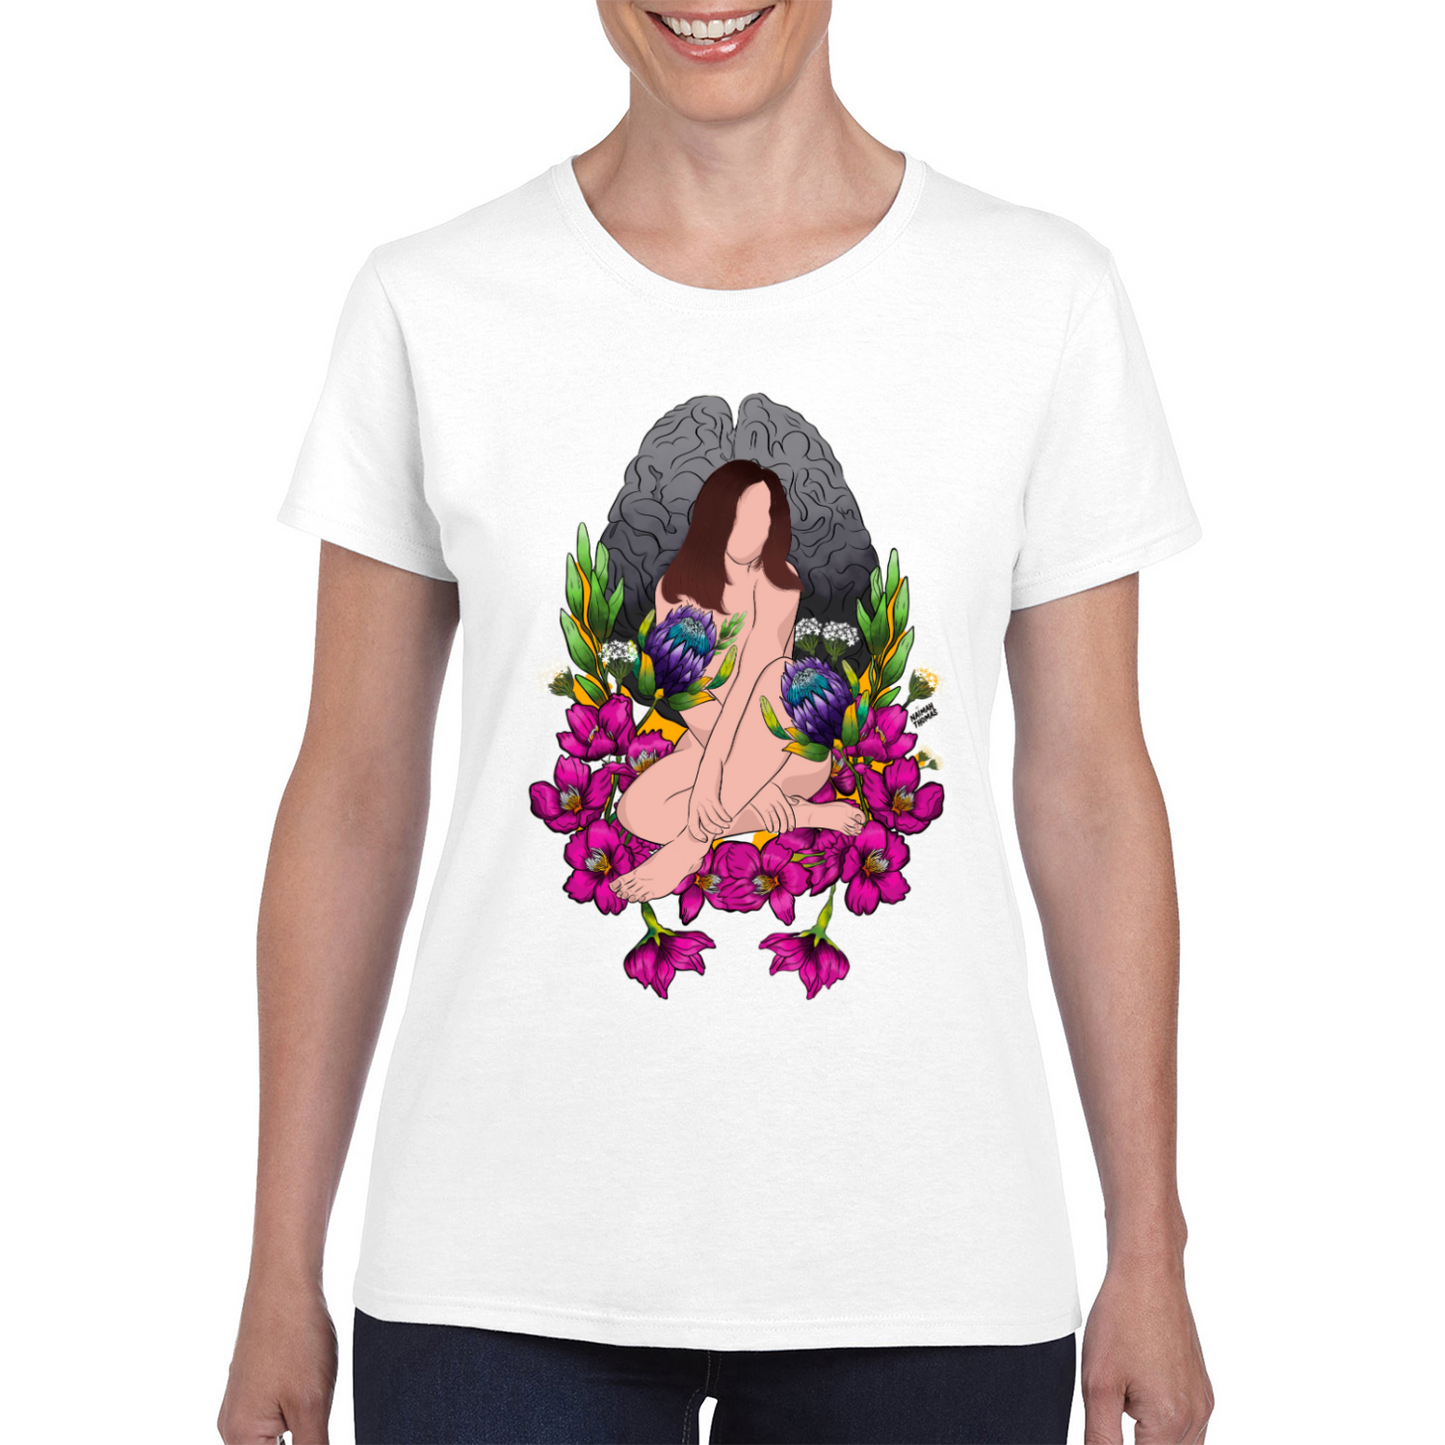 "Wandering amongst the cherry blossoms" Women's Tee